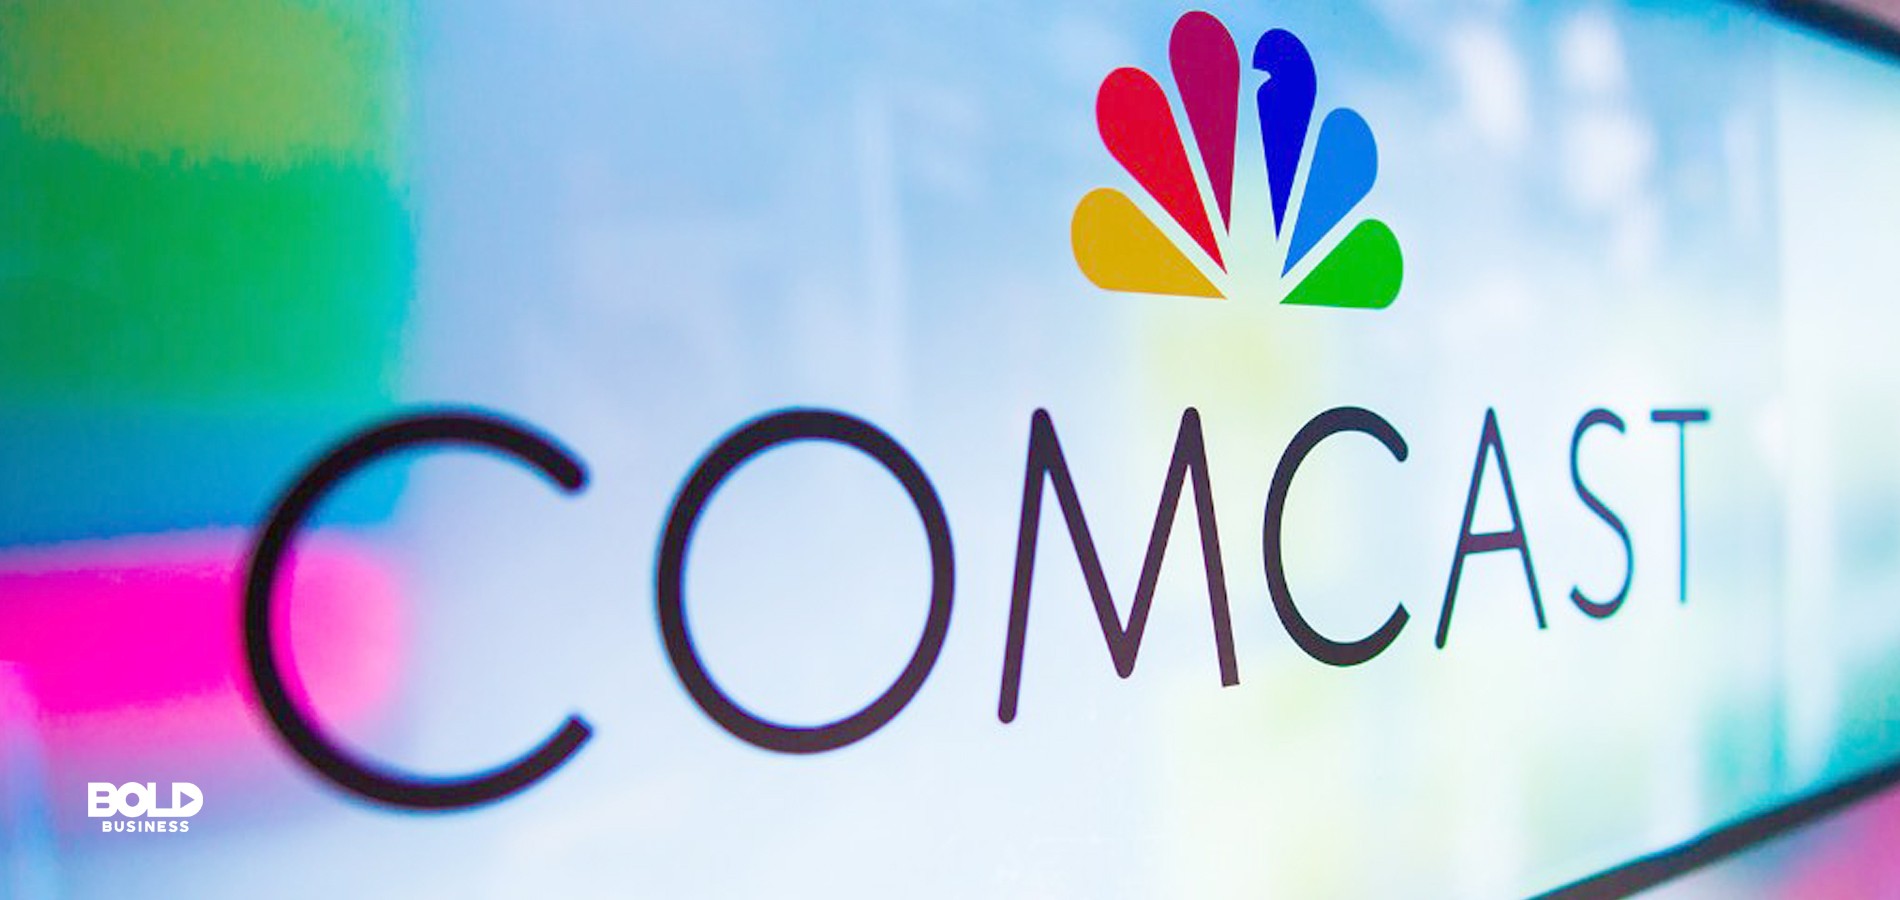 Digital streaming platforms have upended the broadcast TV space, but NBCUniversal has adapted.